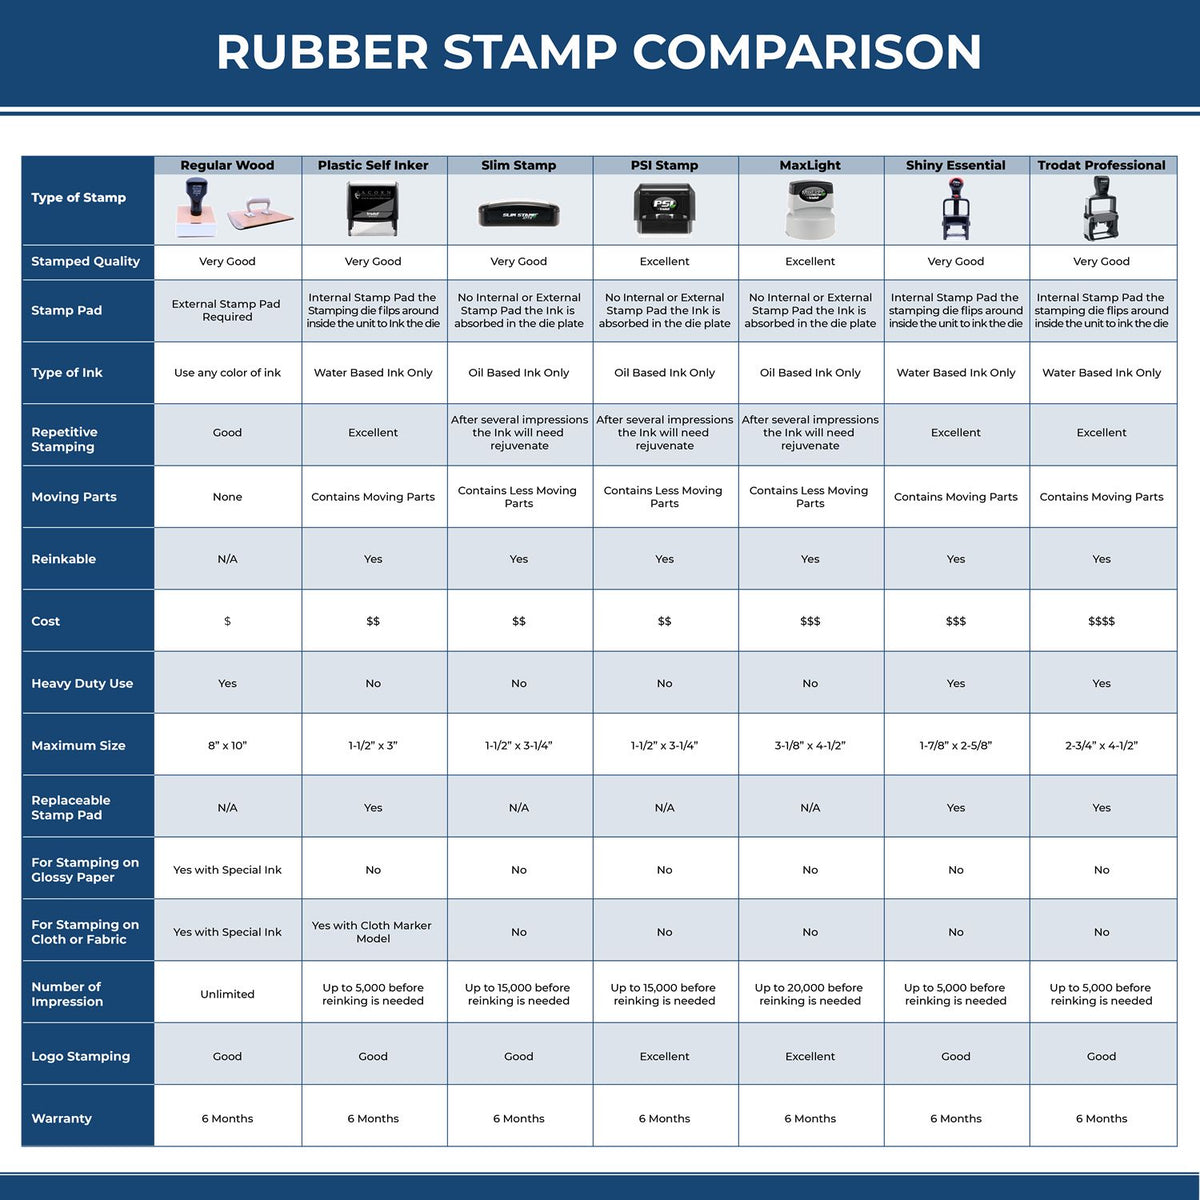 Large Self-Inking Void with X Stamp 5666S Rubber Stamp Comparison